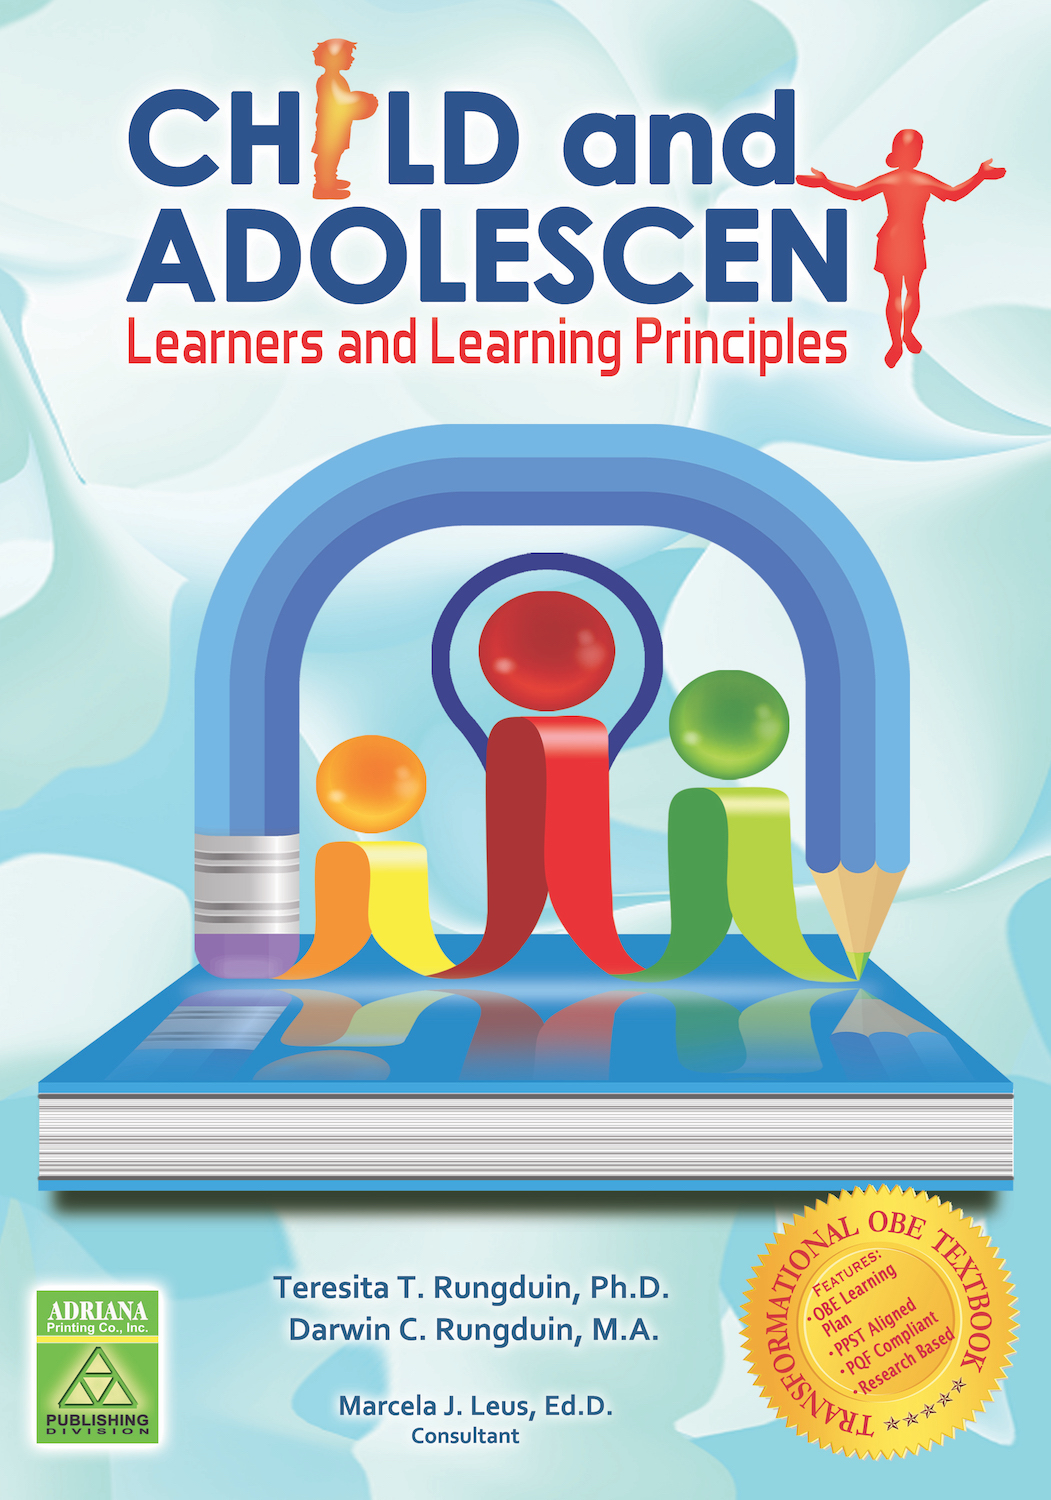 research about child and adolescent development in the philippines